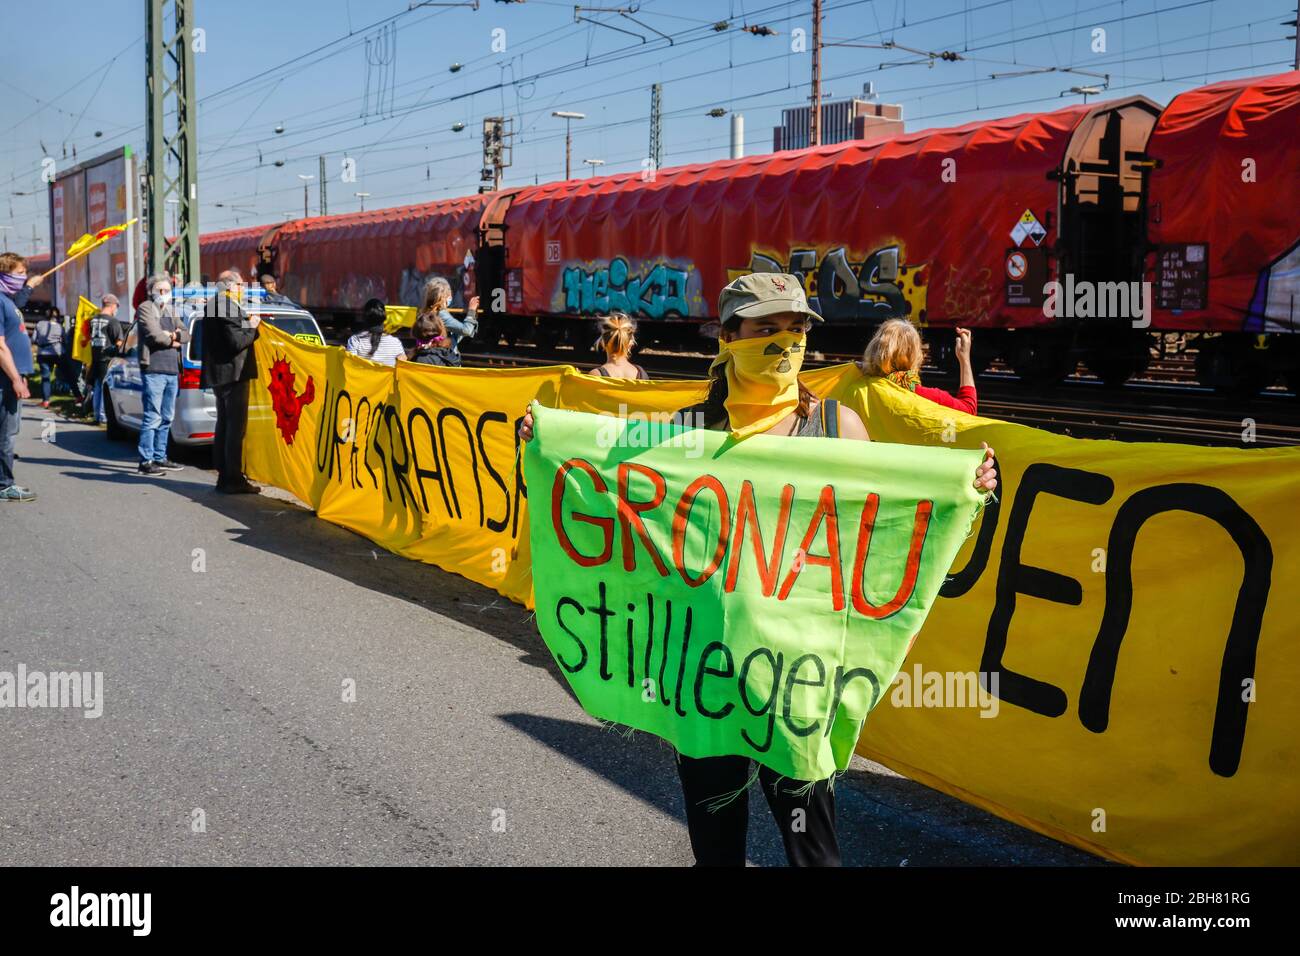 06.04.2020, Muenster, North Rhine-Westphalia, Germany - Opponents of nuclear power demonstrate at the Muenster freight station against the Castor tran Stock Photo